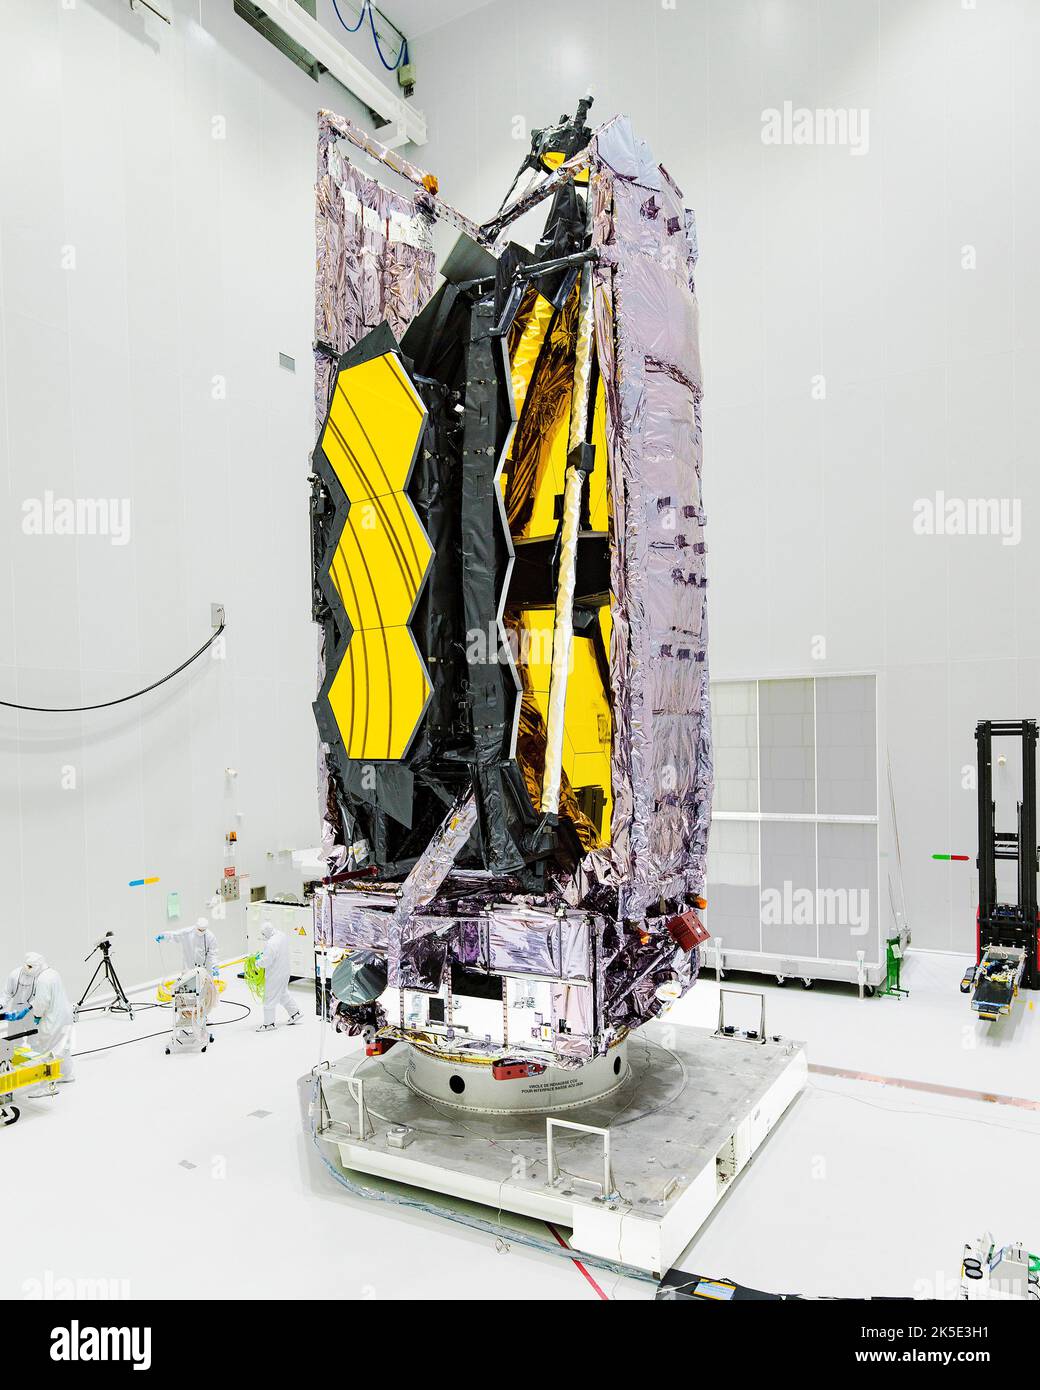 James Webb Space Telescope (JWST) on flight launch adapter at Europe's Spaceport in Kourou, French Guiana. Webb launched on 25 December, 2021.  An optimised version of a NASA image by experienced lead photographer Chris Gunn. Credit: NASA/Chris Gunn. For editorial use only. Stock Photo